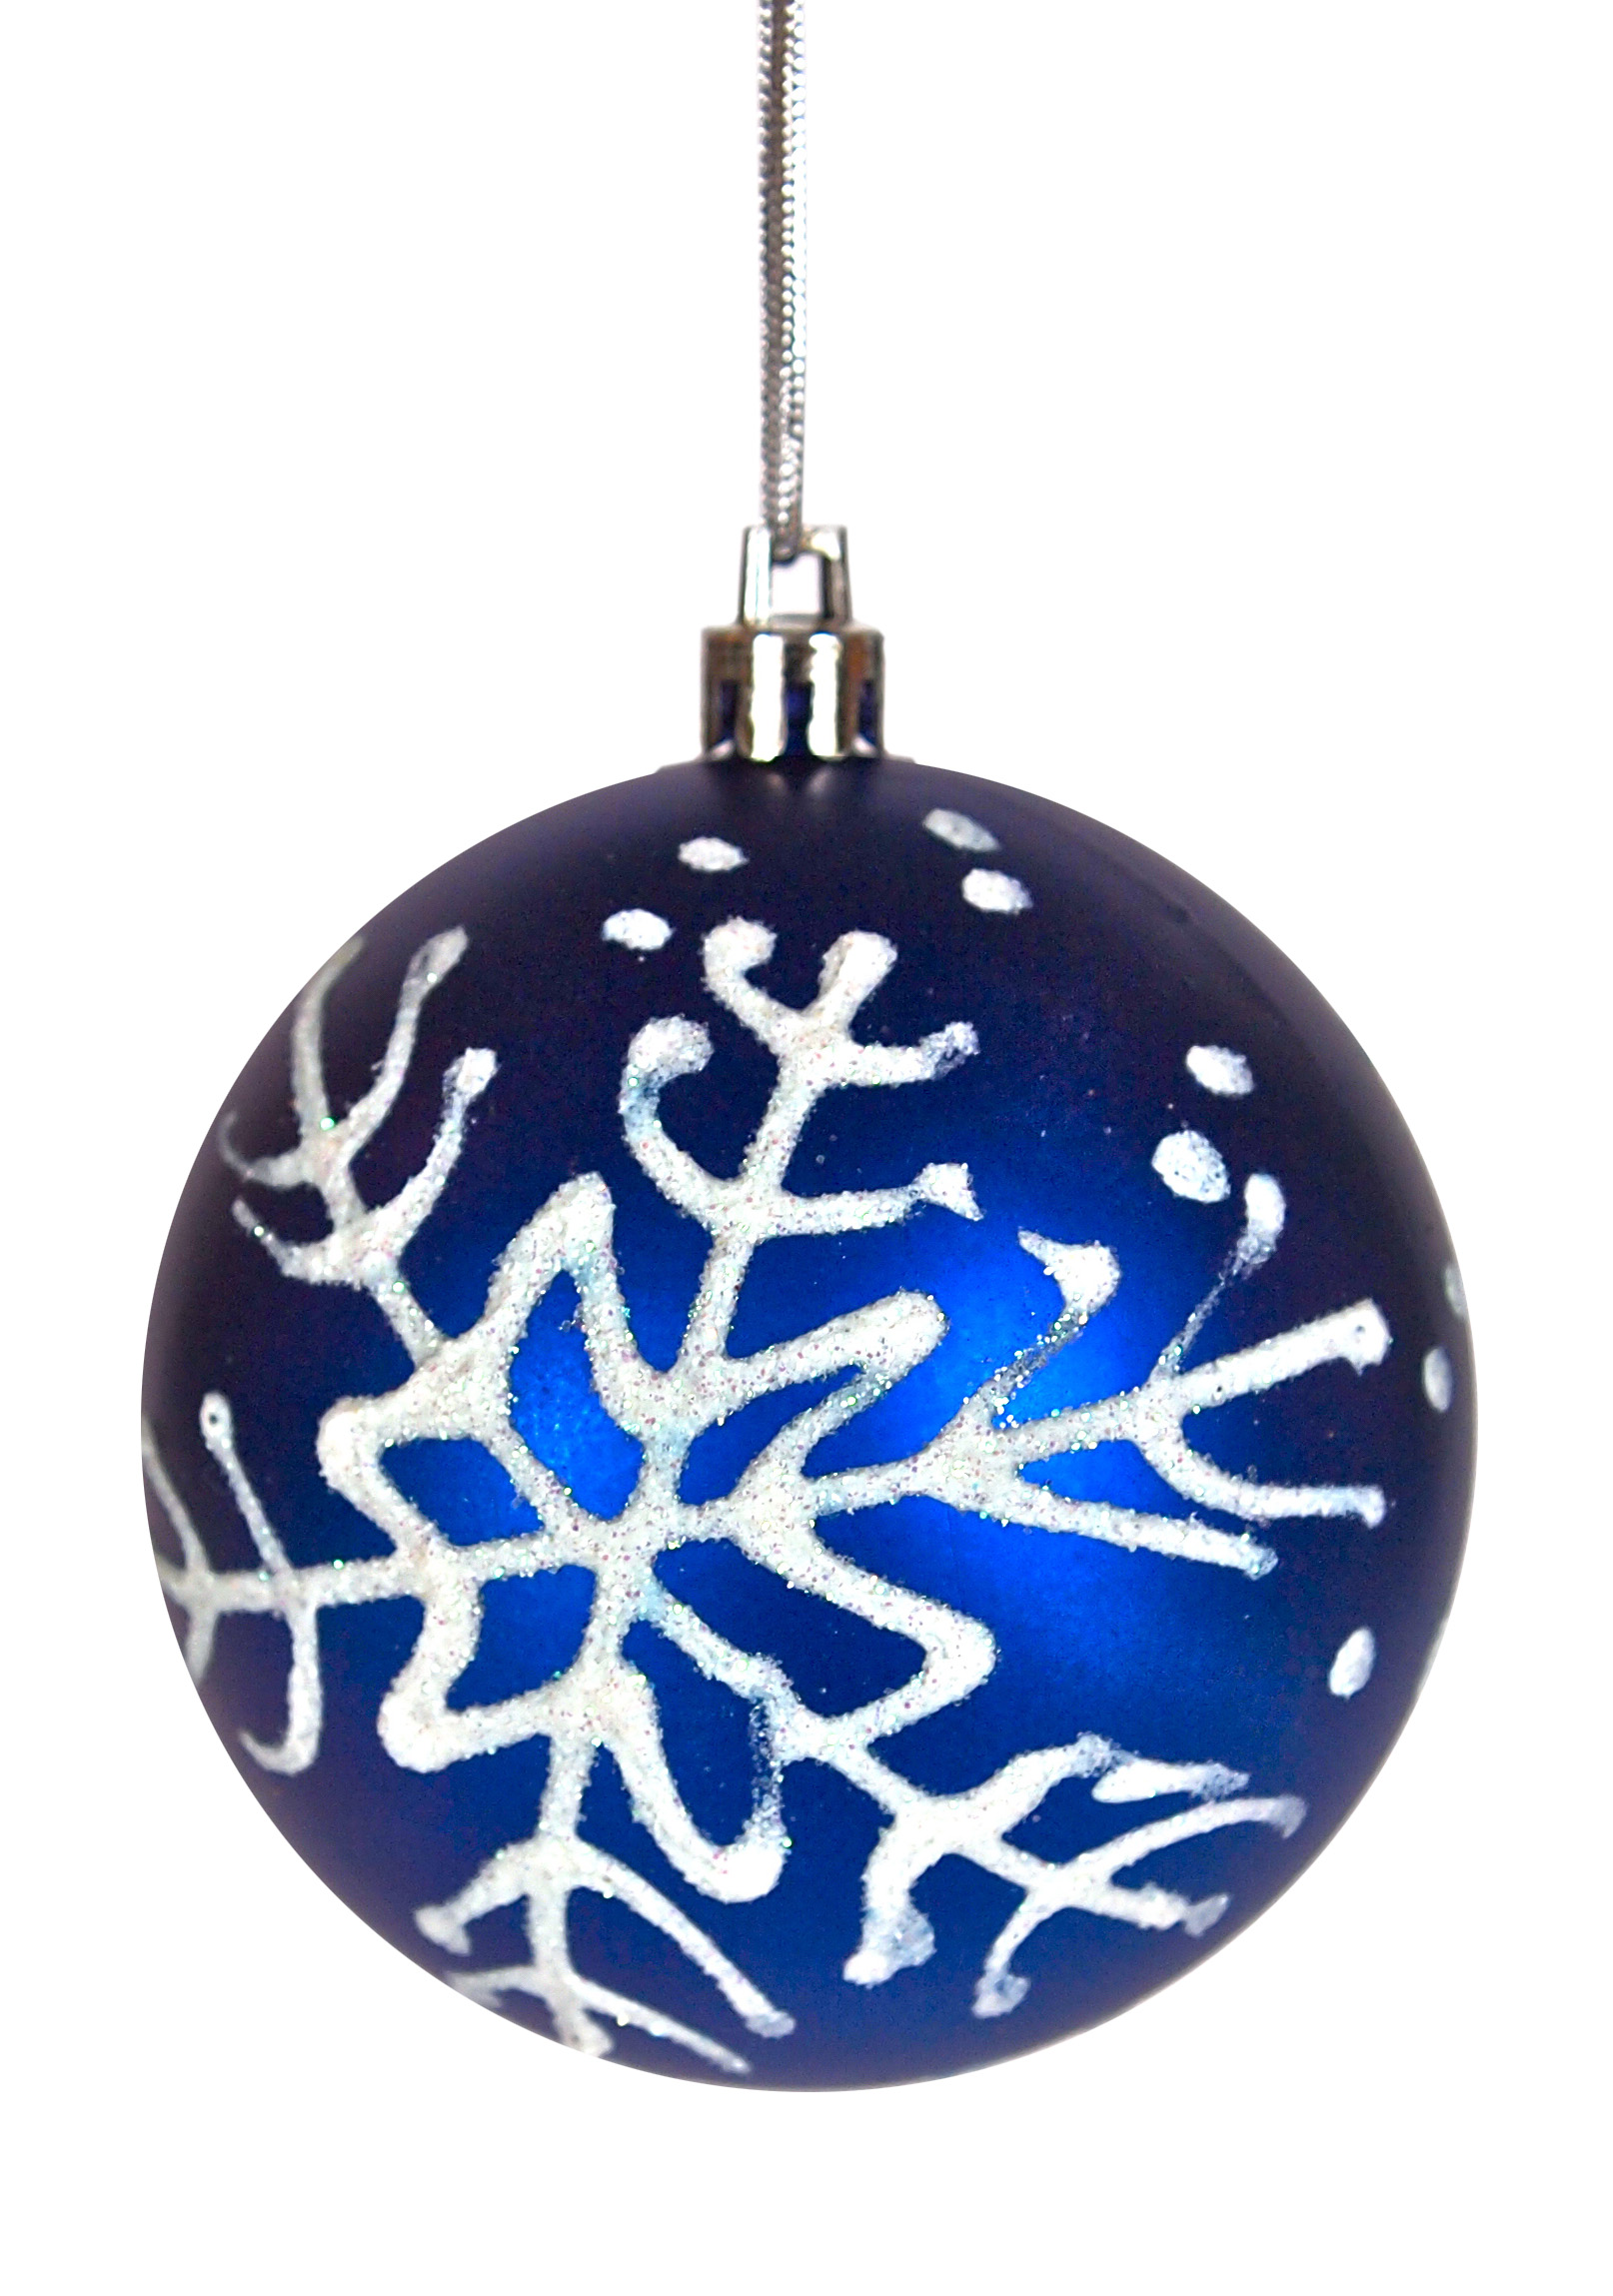 Isolated Blue Christmas Ornament | No cost royalty free stock